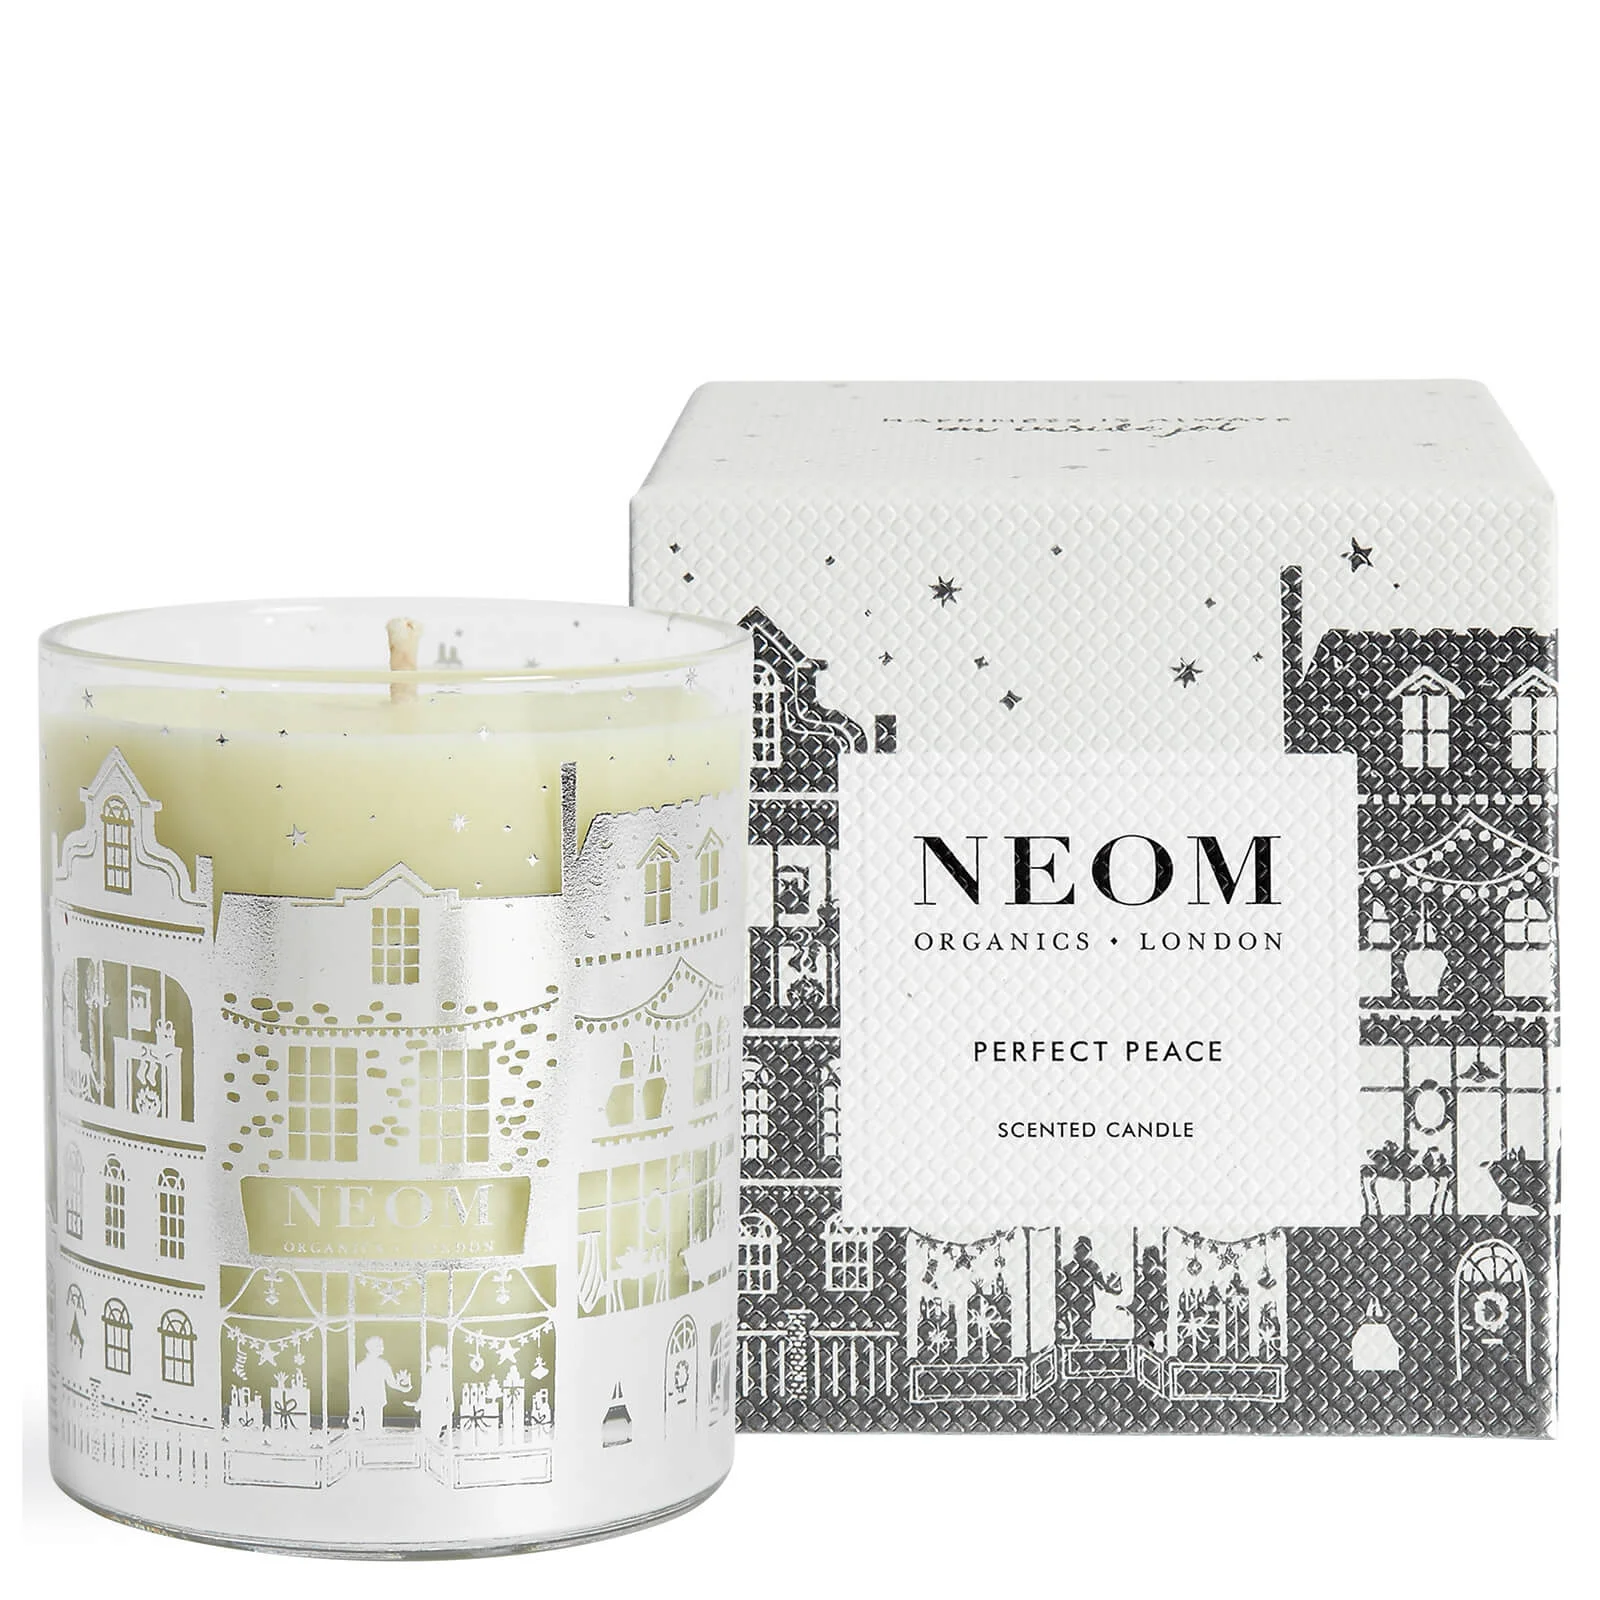 Neom Organics London Perfect Peace Scented Candle (1 Wick) Image 1